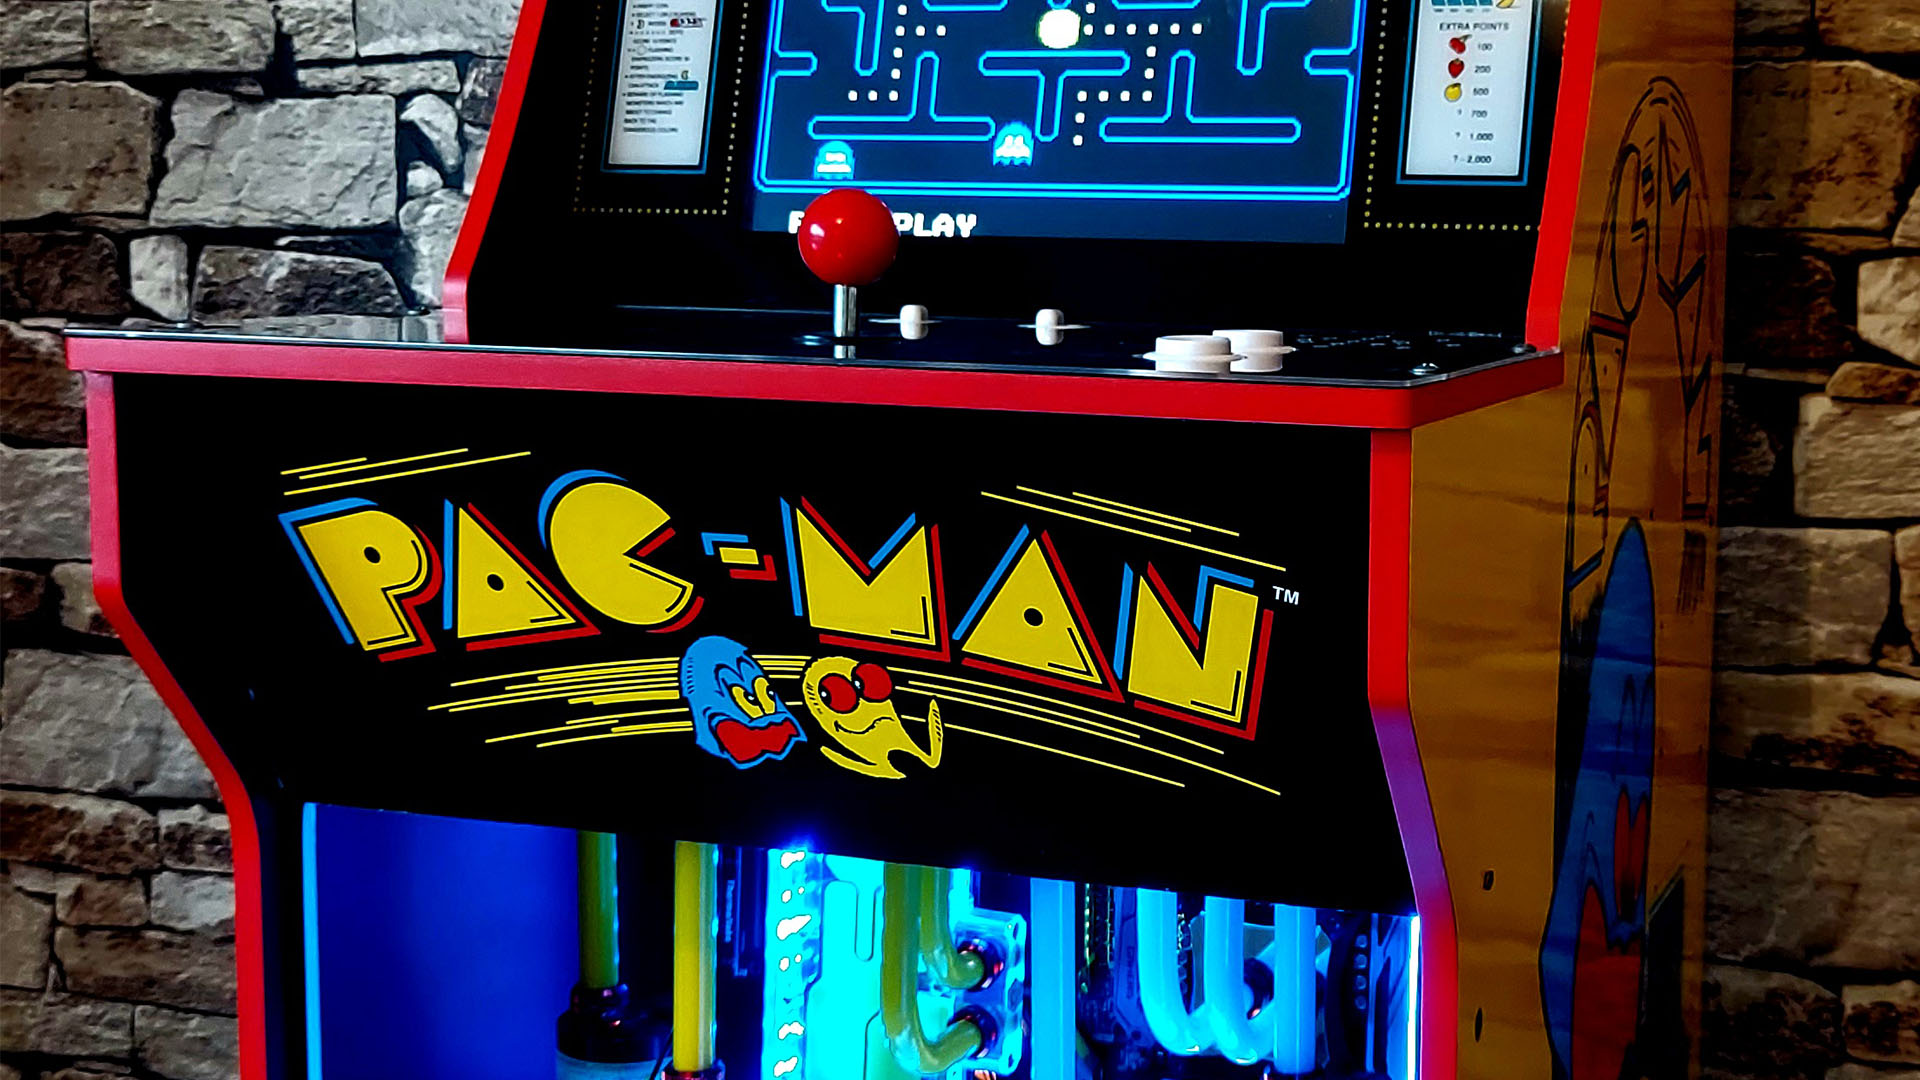 A Pac-man arcade cabinet housing a water-cooled gaming PC